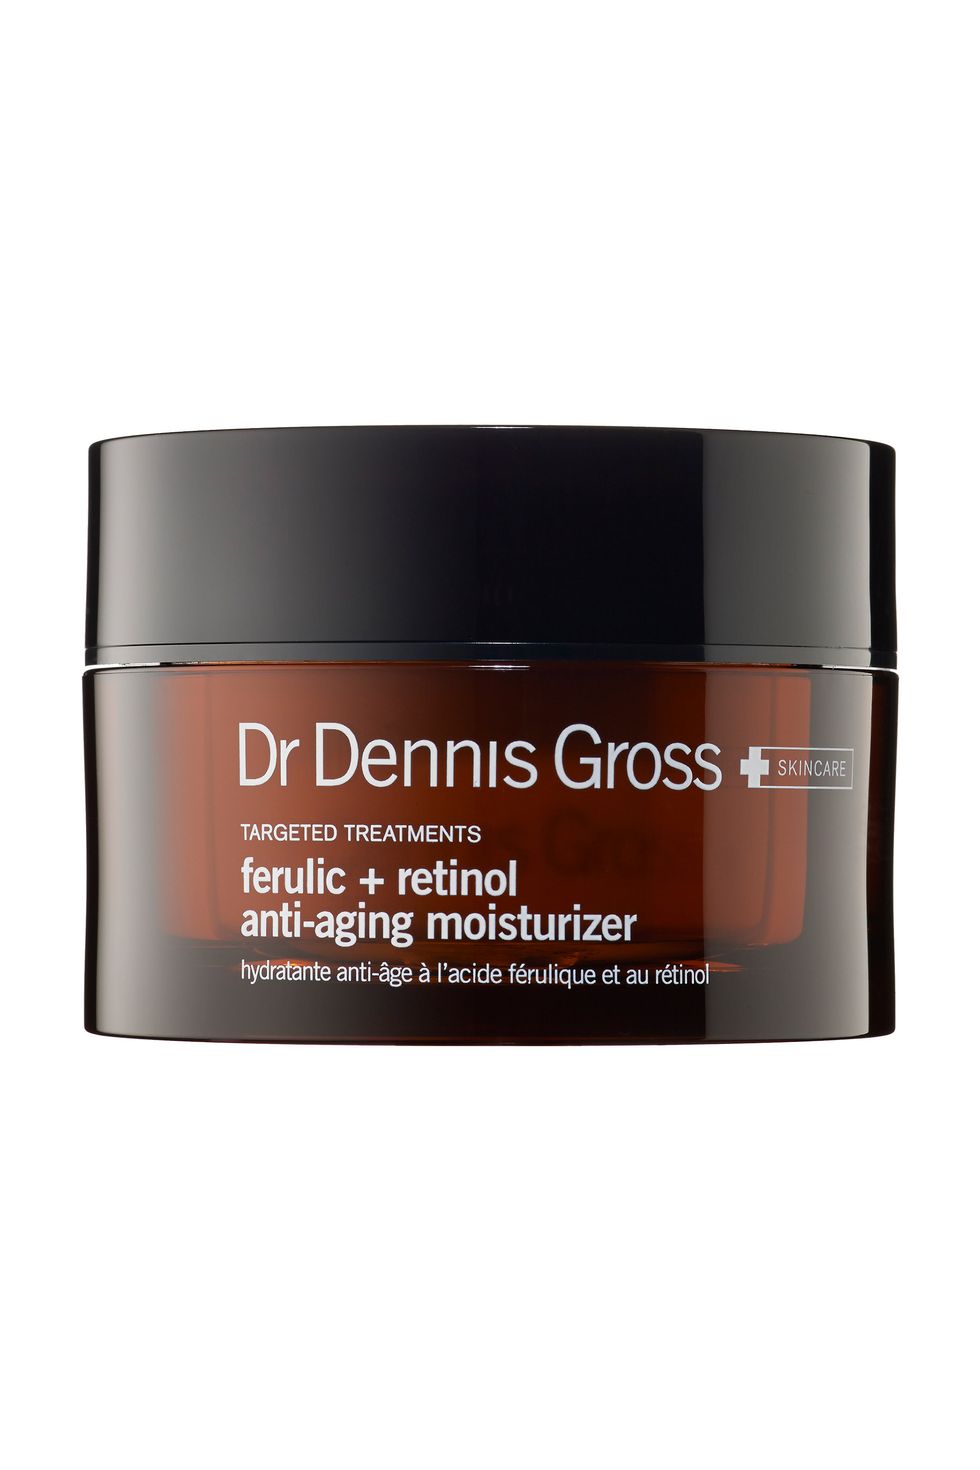 <p>I'm obsessed with every Dr. Dennis Gross skincare product that I've ever tried and this wrinkle cream is no exception. For those who have no idea where to start when it comes to anti-agers, this moisturizer is your new best friend. —Nikki Ogunnaike, Senior Fashion Editor</p><p><i>Dr. Dennis Gross Skincare Ferulic + Retinol Anti-Aging Moisturizer, $72; <a href="http://m.sephora.com/product/P384536" target="_blank">sephora.com</a></i></p>